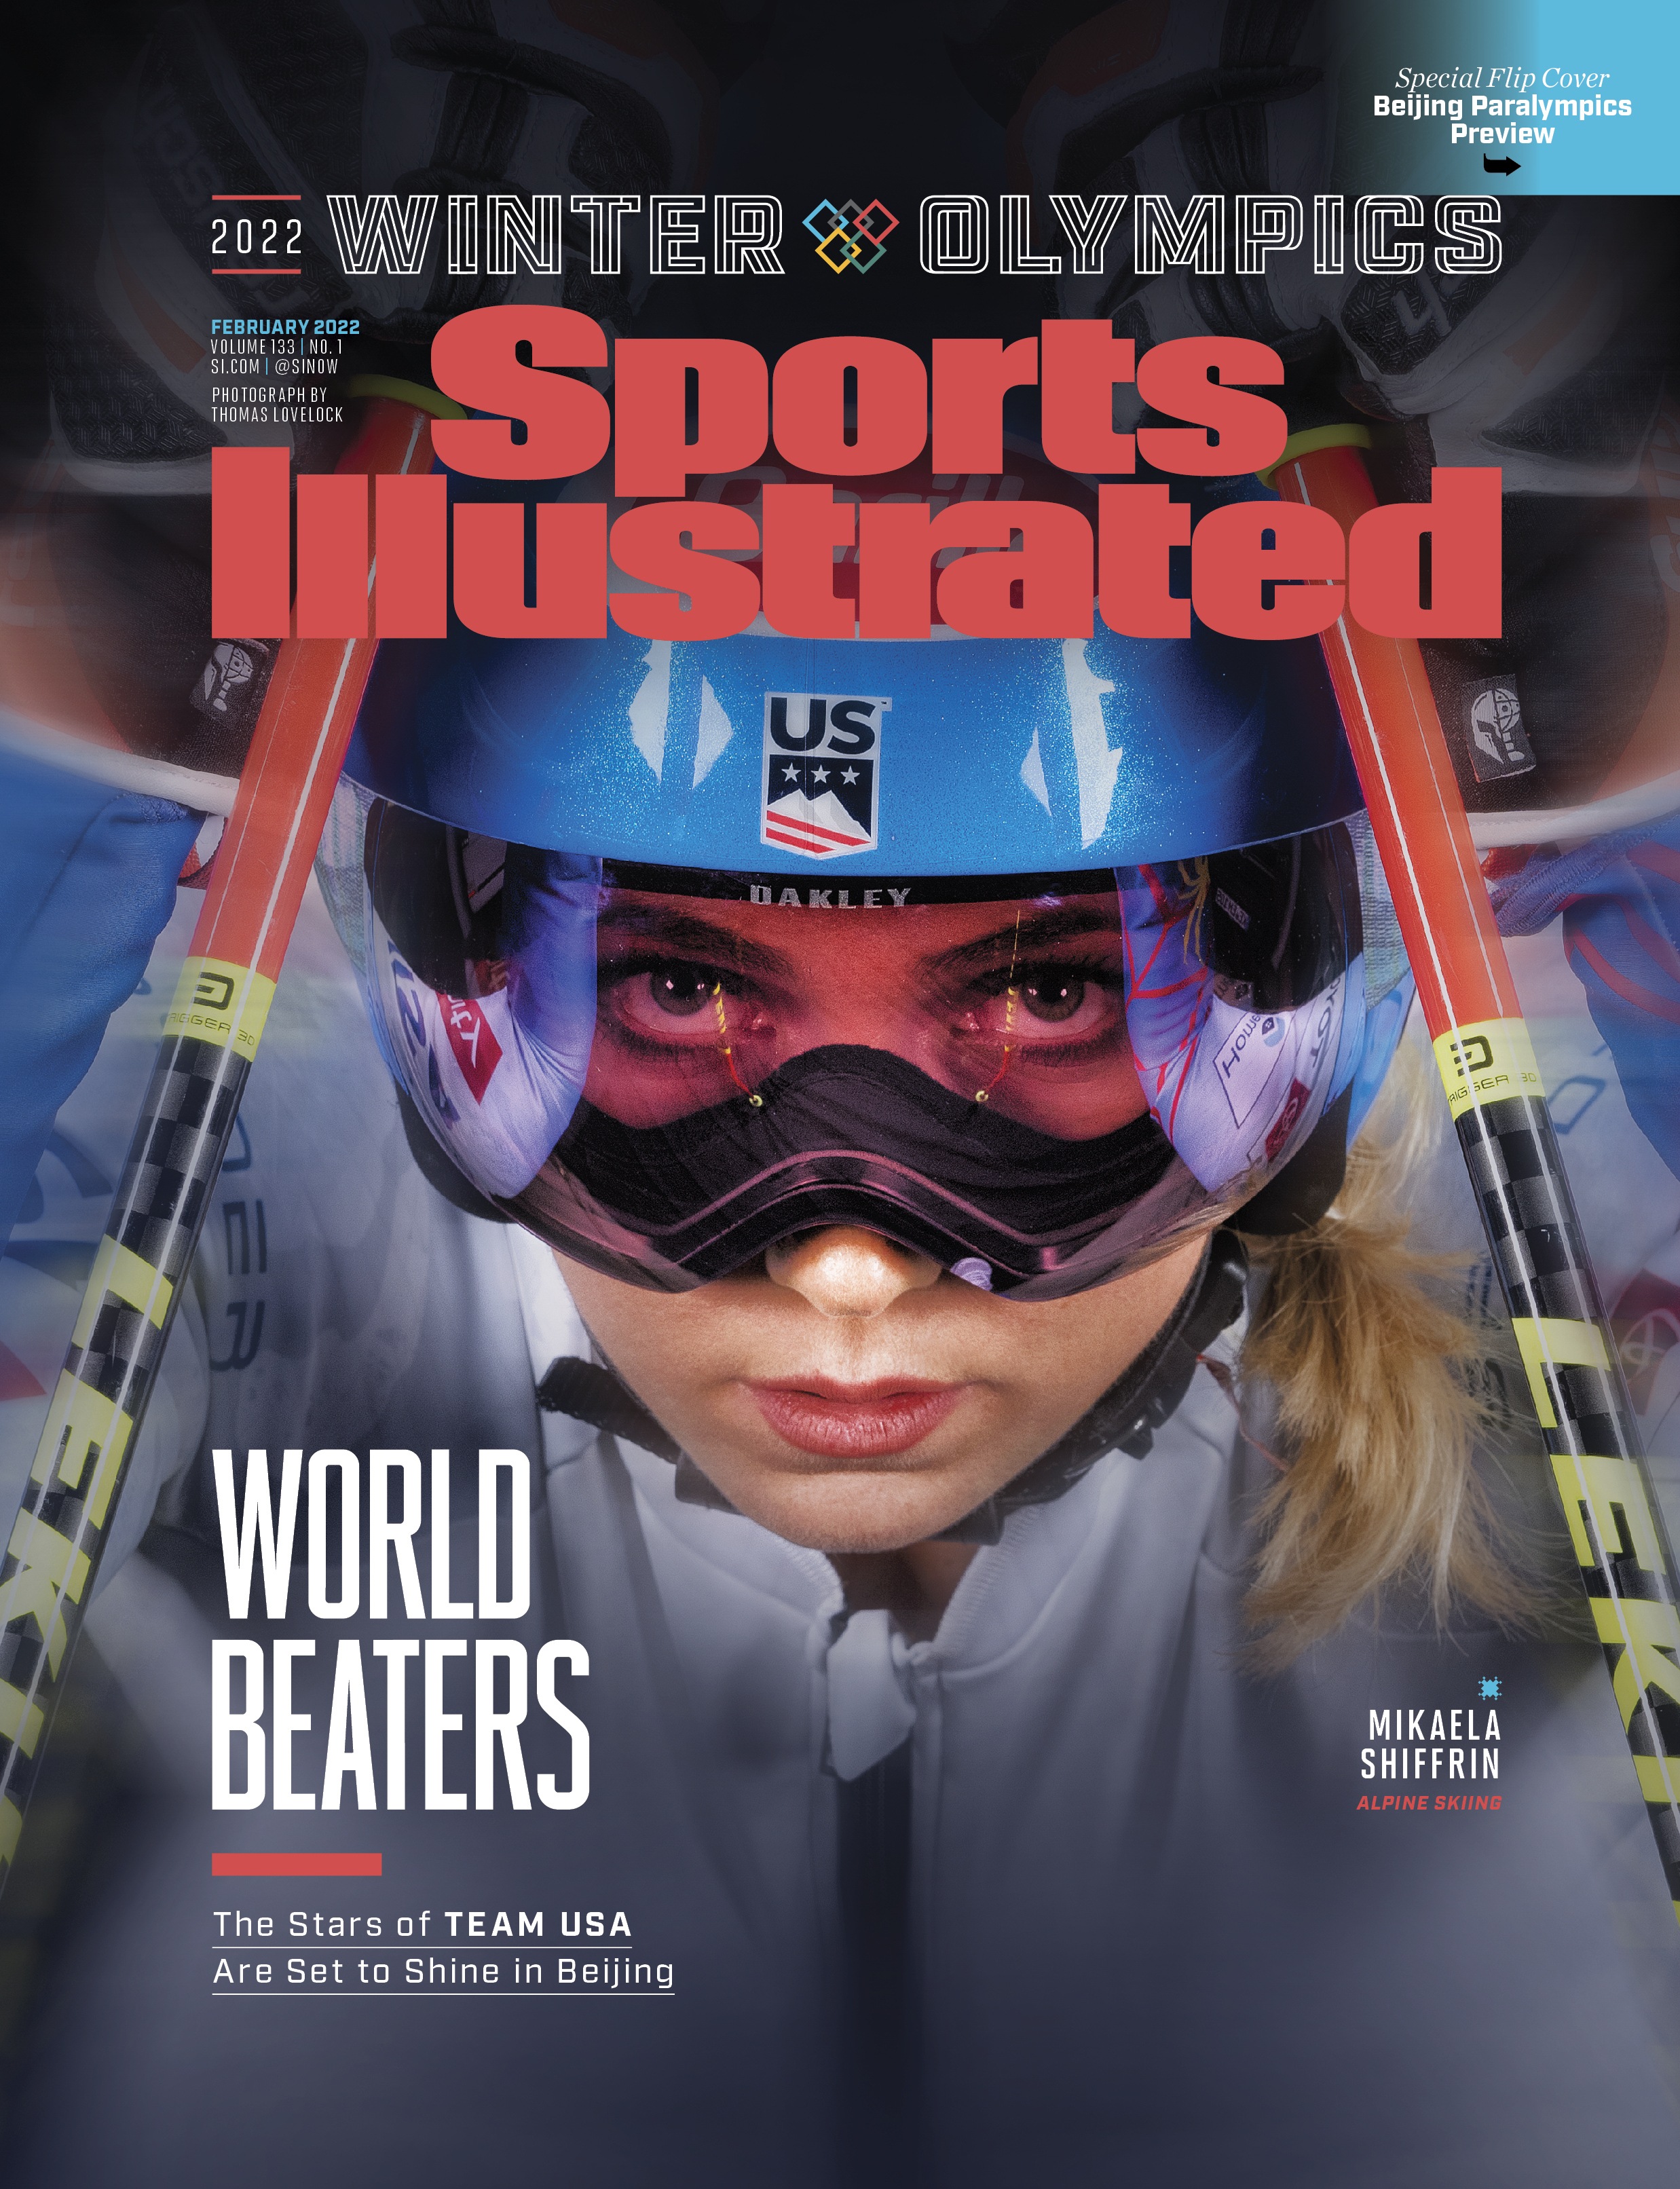 Four Women Represent a Talented Team USA On Cover Of Sports